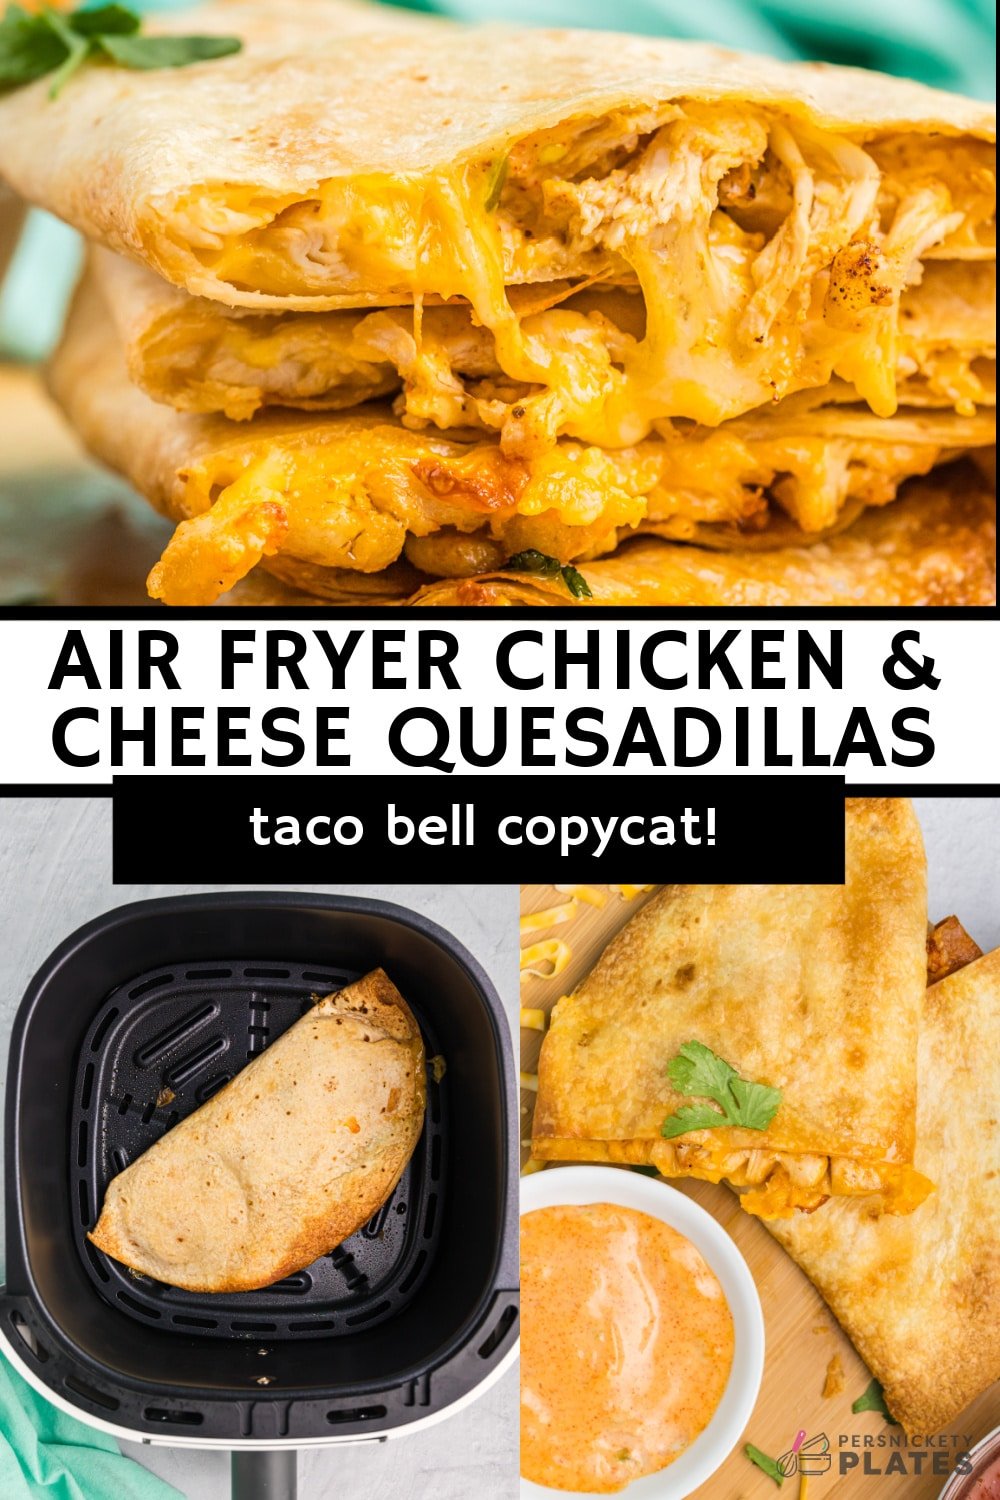 This air fryer chicken and cheese quesadilla with a quick copycat Taco Bell quesadilla sauce is such an easy meal idea. Making them in the air fryer leaves the tortilla perfectly crisp and the cheese nice and melty. | www.persnicketyplates.com